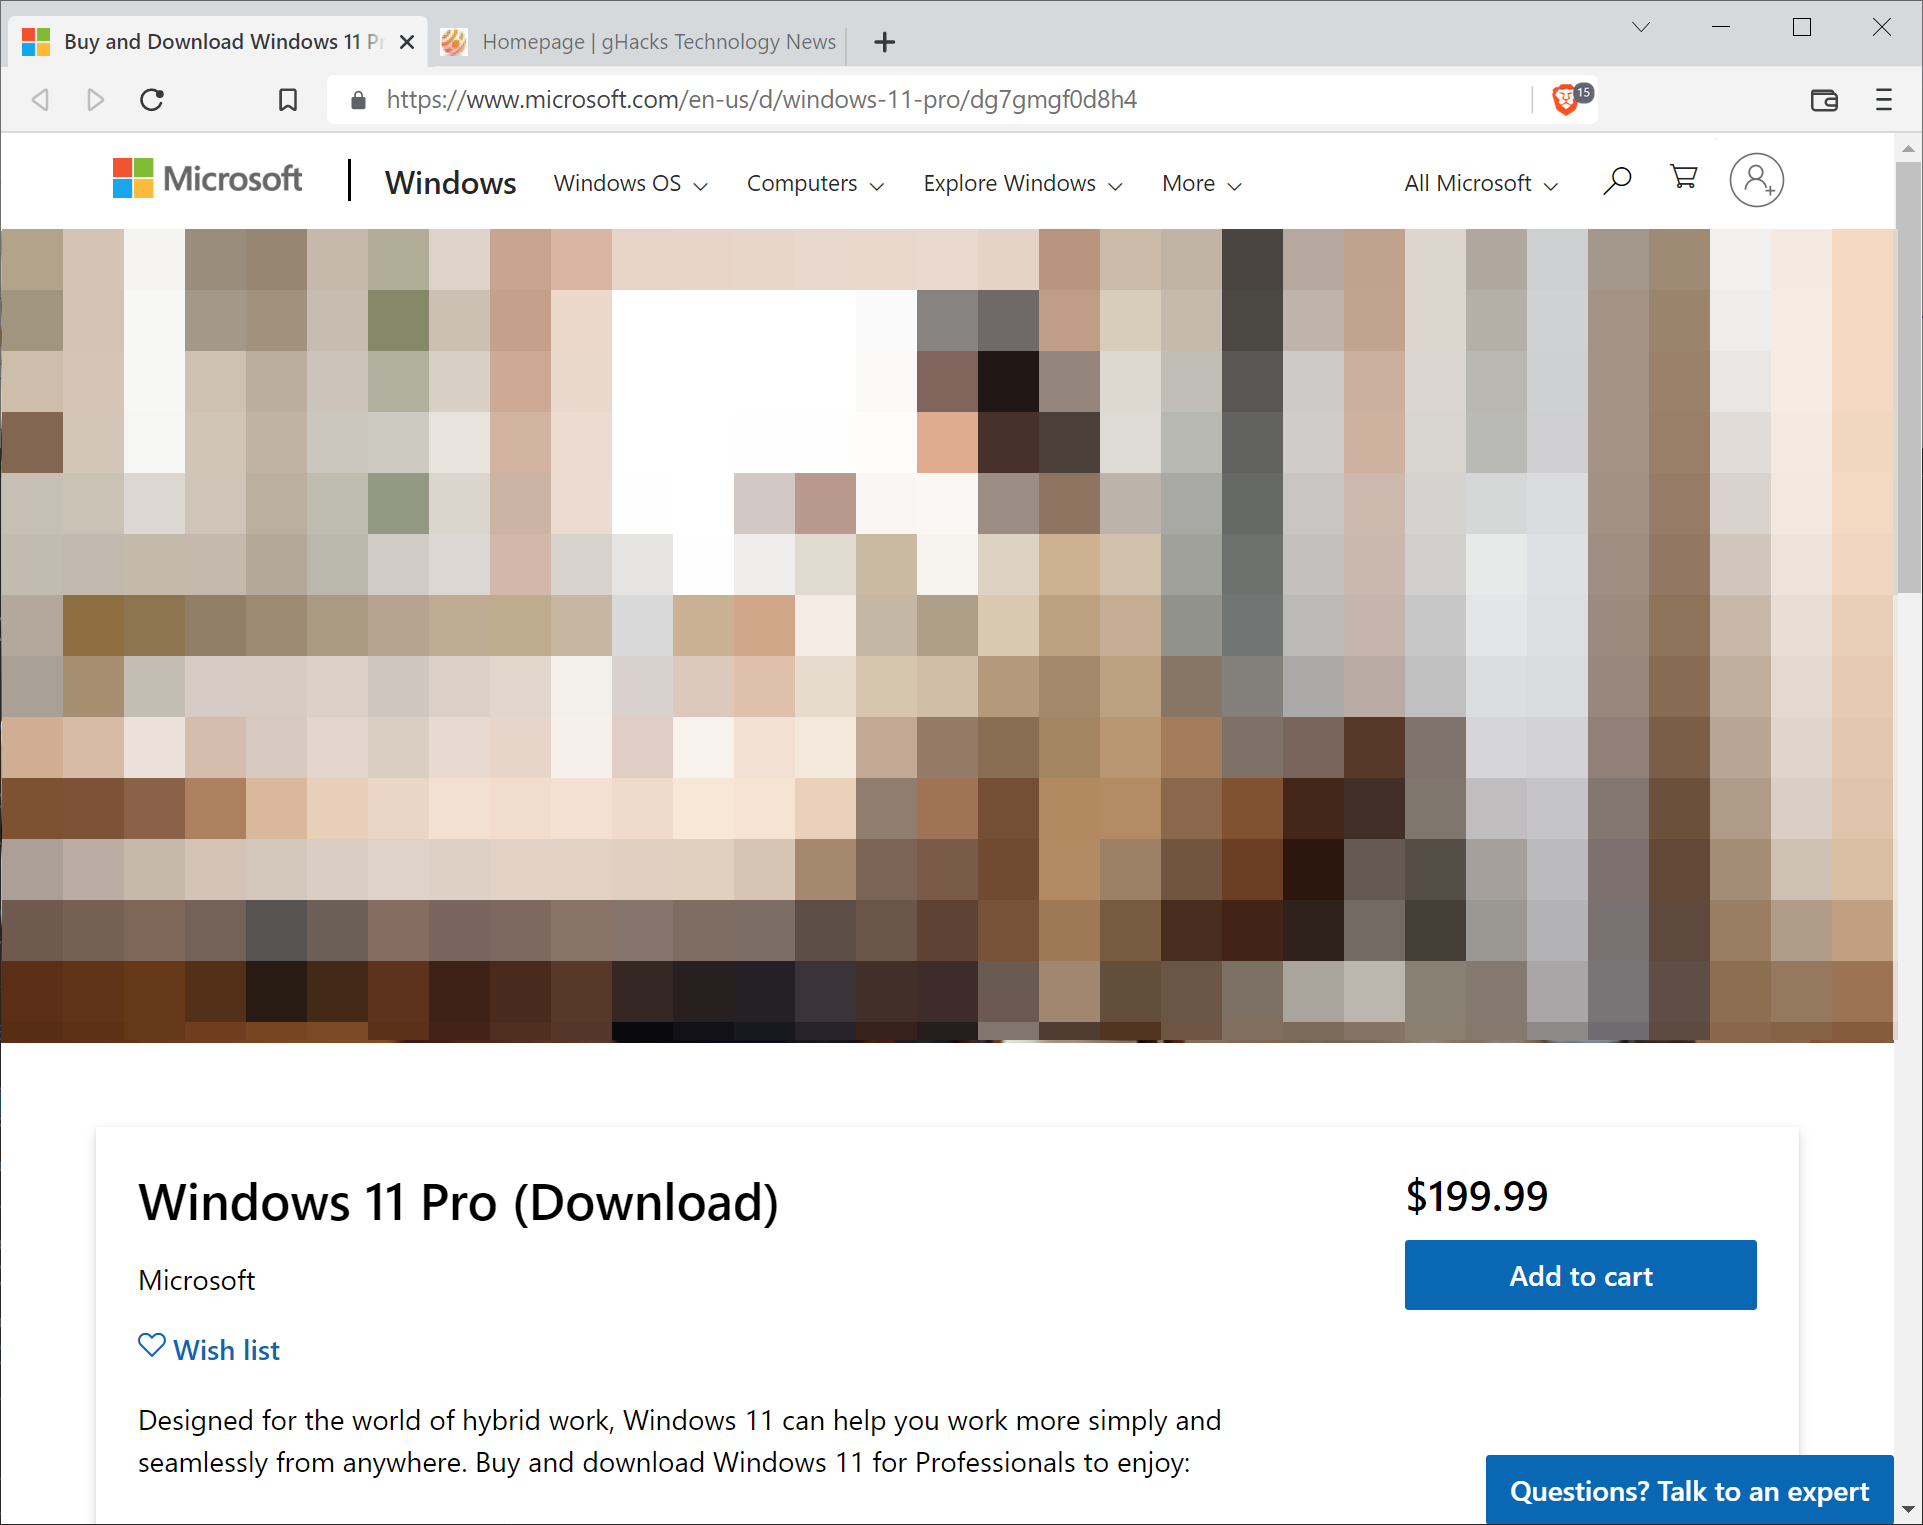 You may now buy Windows 11 licenses directly from Microsoft (but shouldn't)